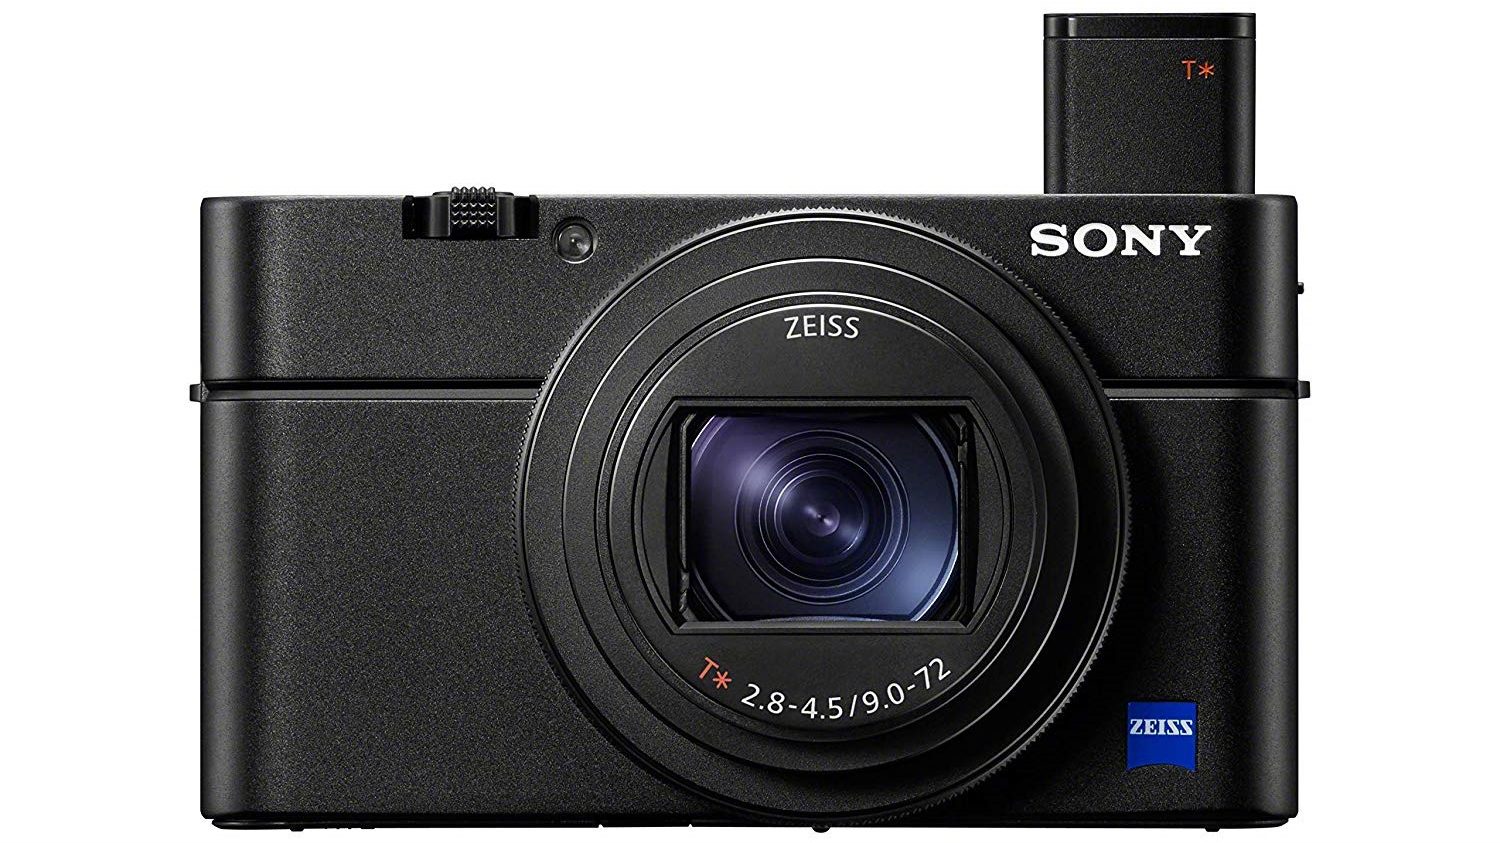 Sony RX100 VII touchscreen camera